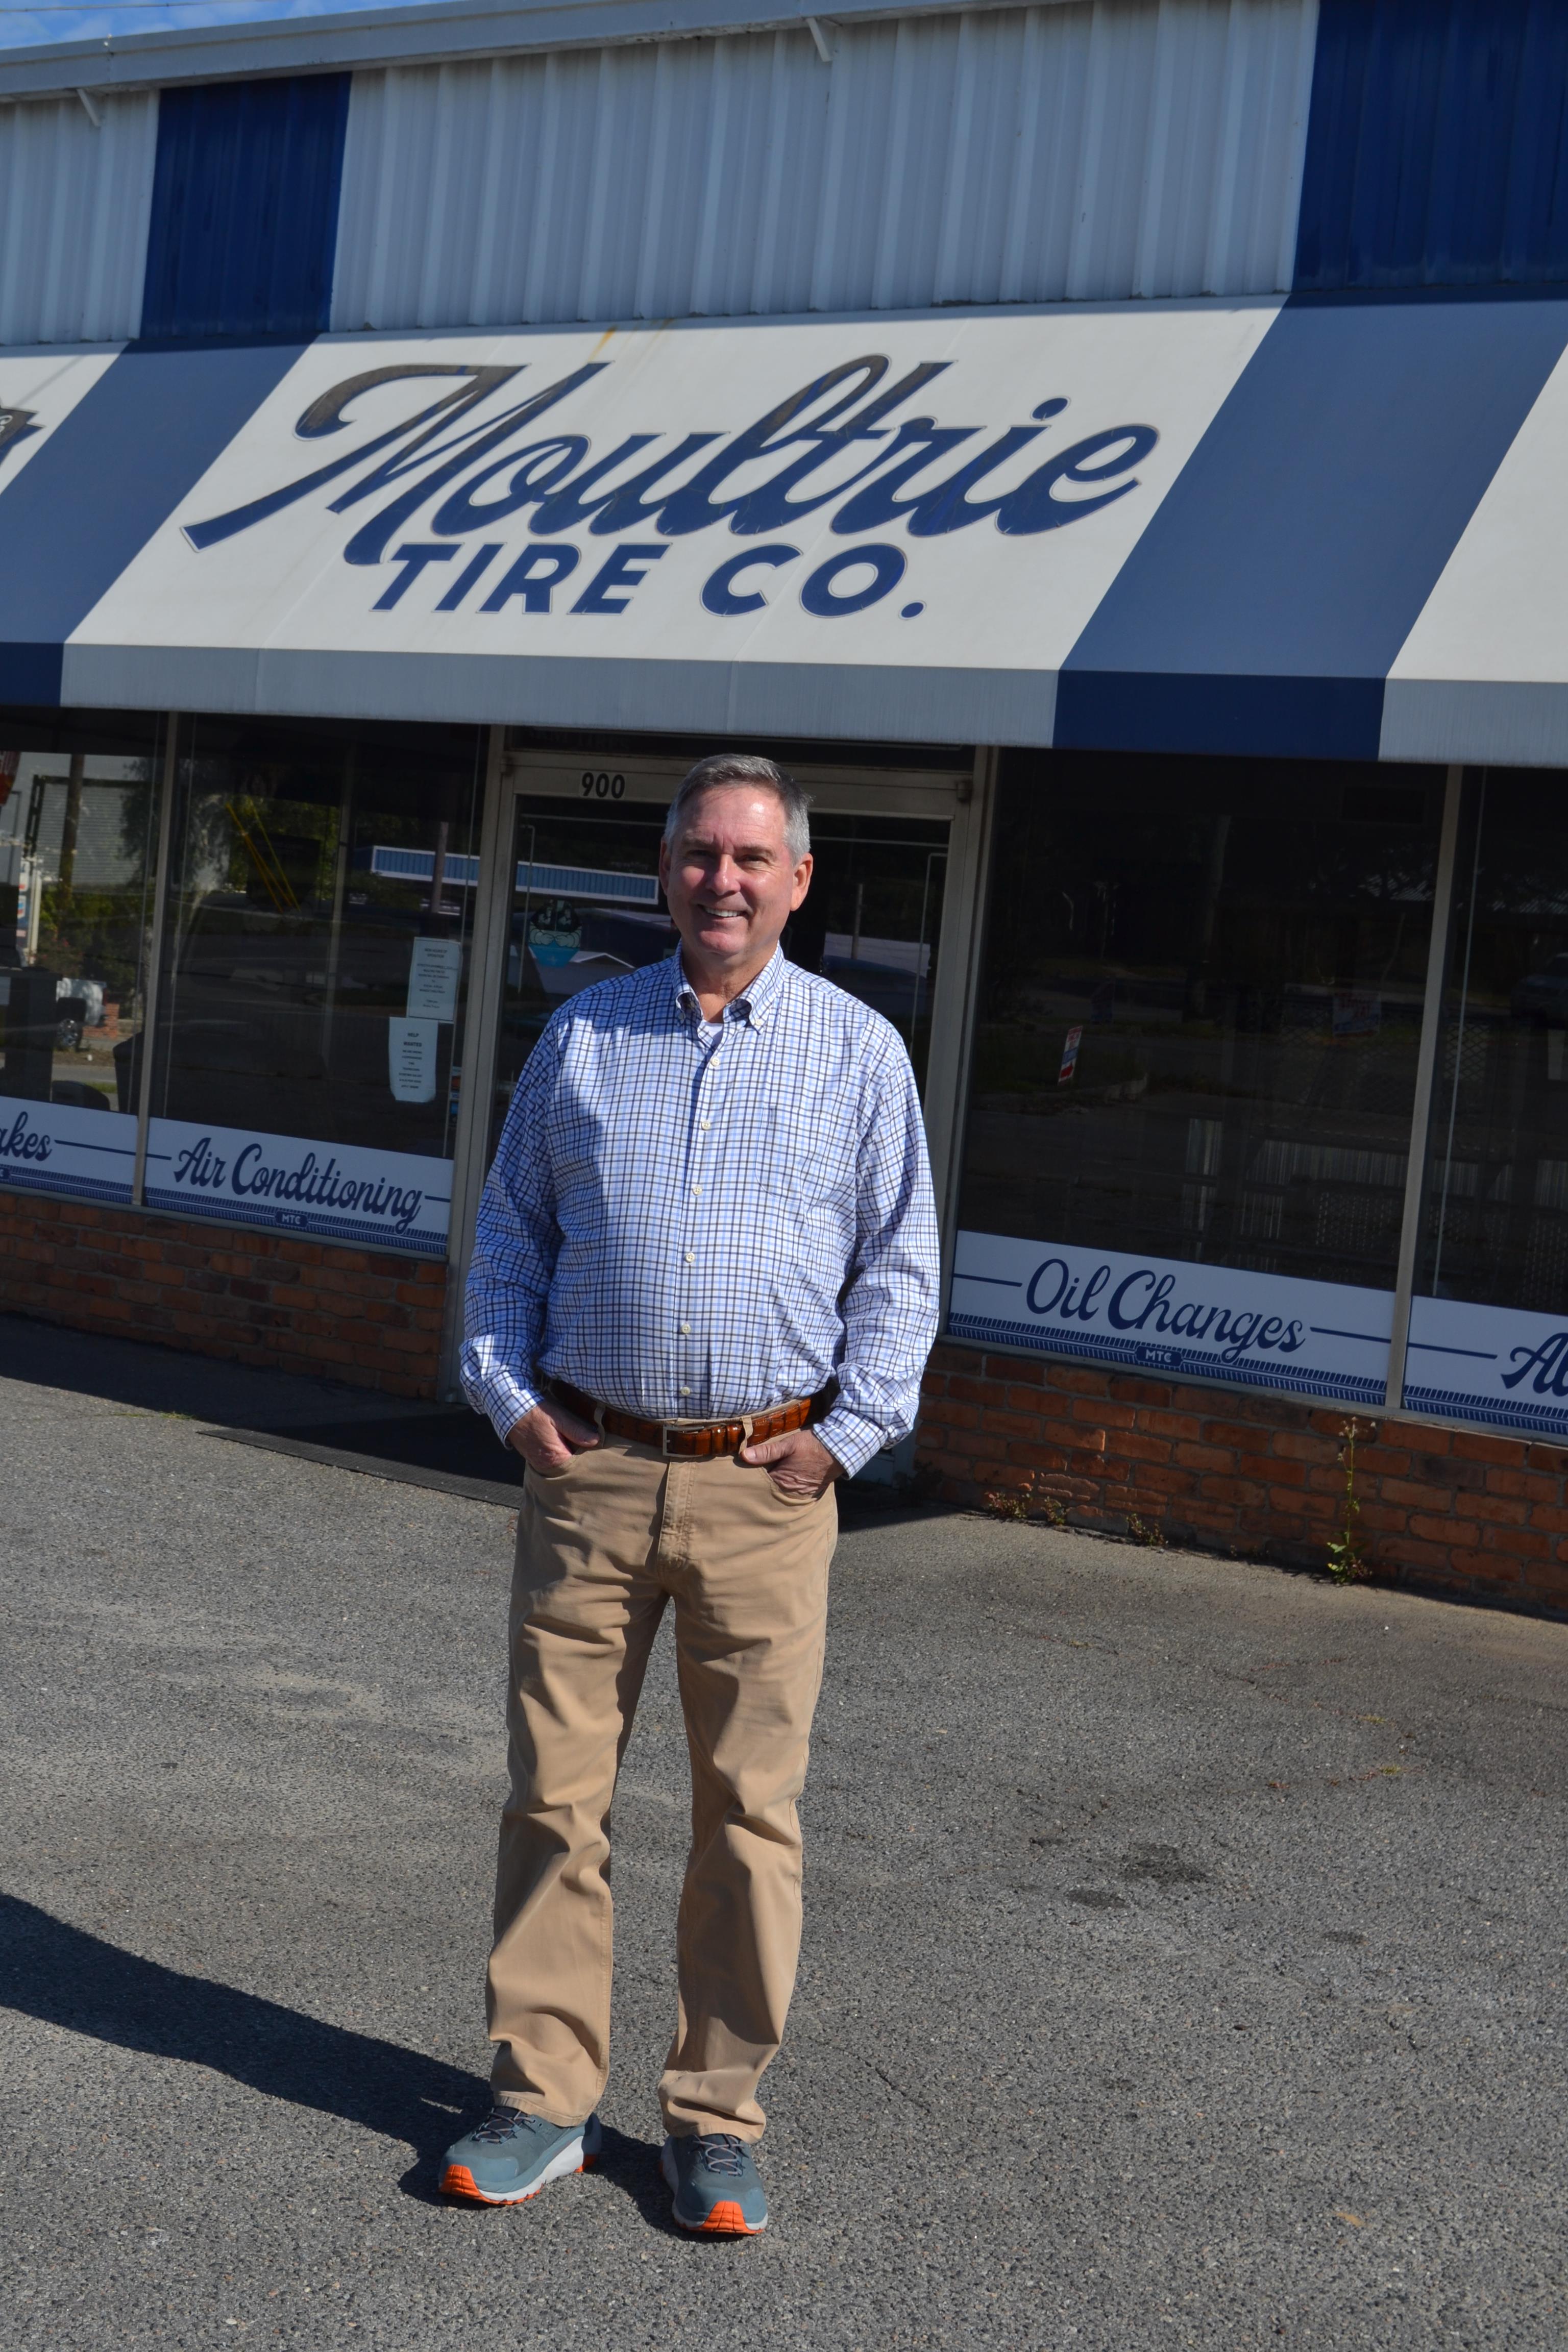 About Moultrie Tire Pros